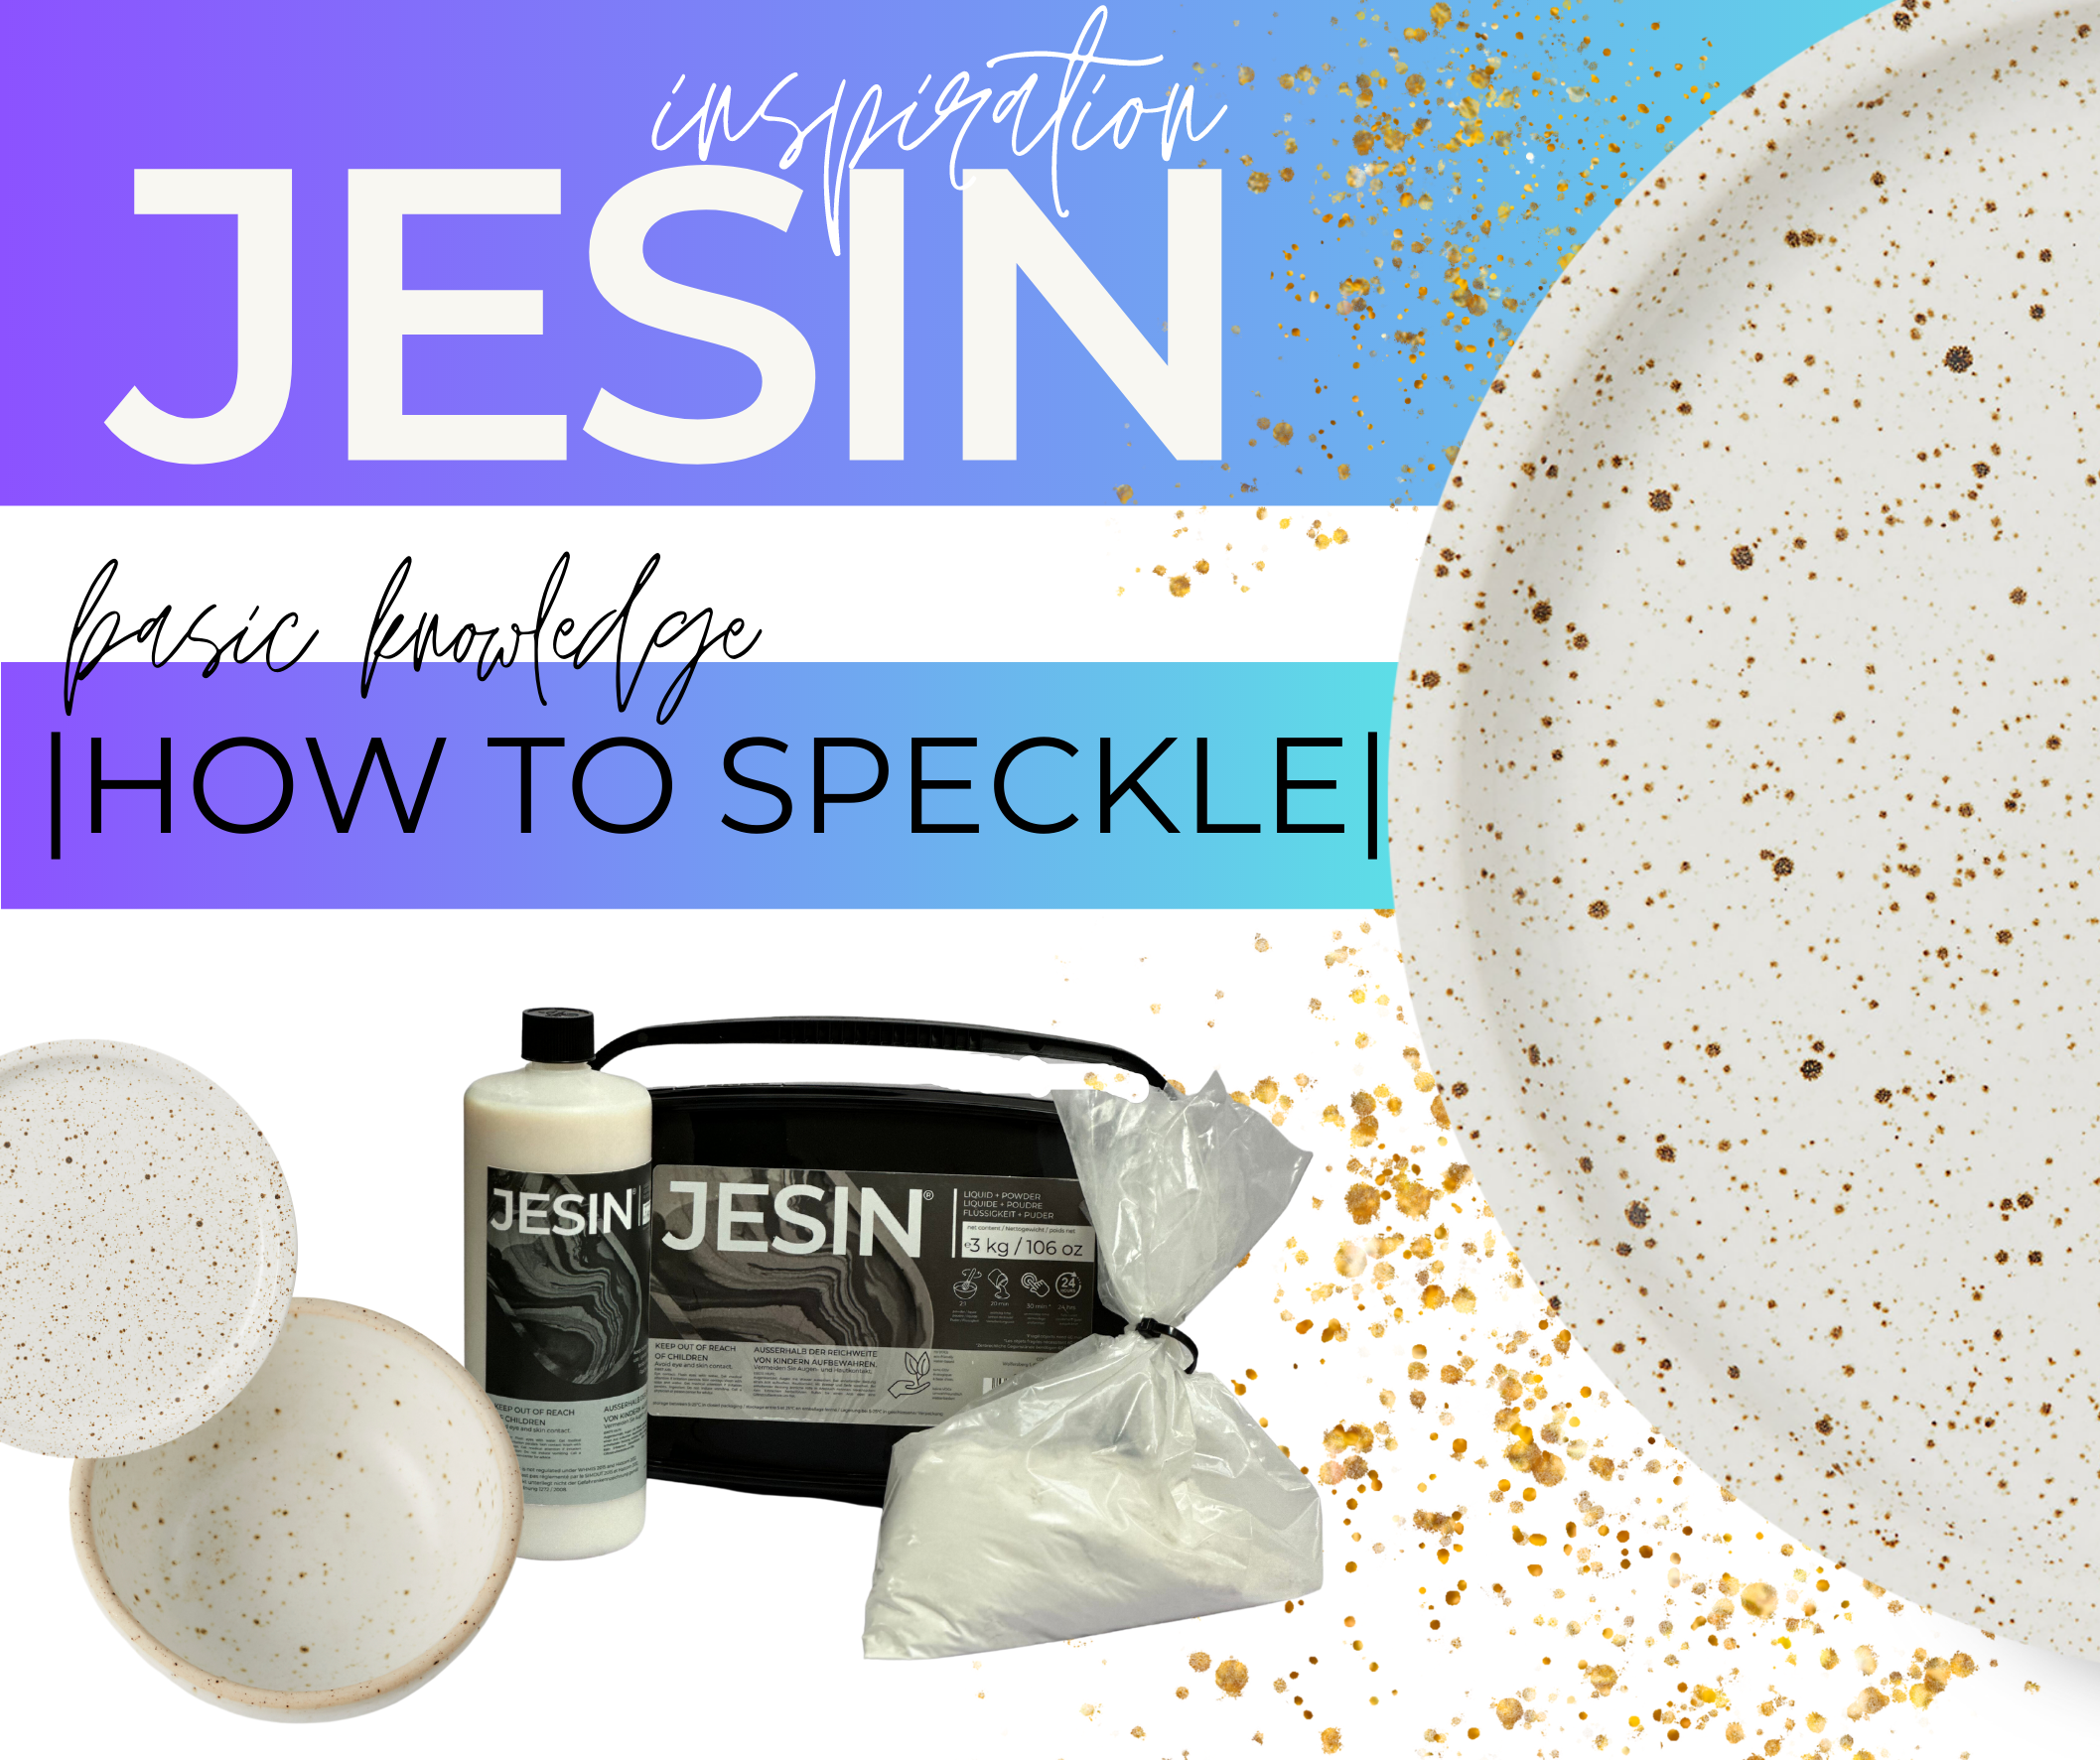 HOW TO SPECKLE JESIN?